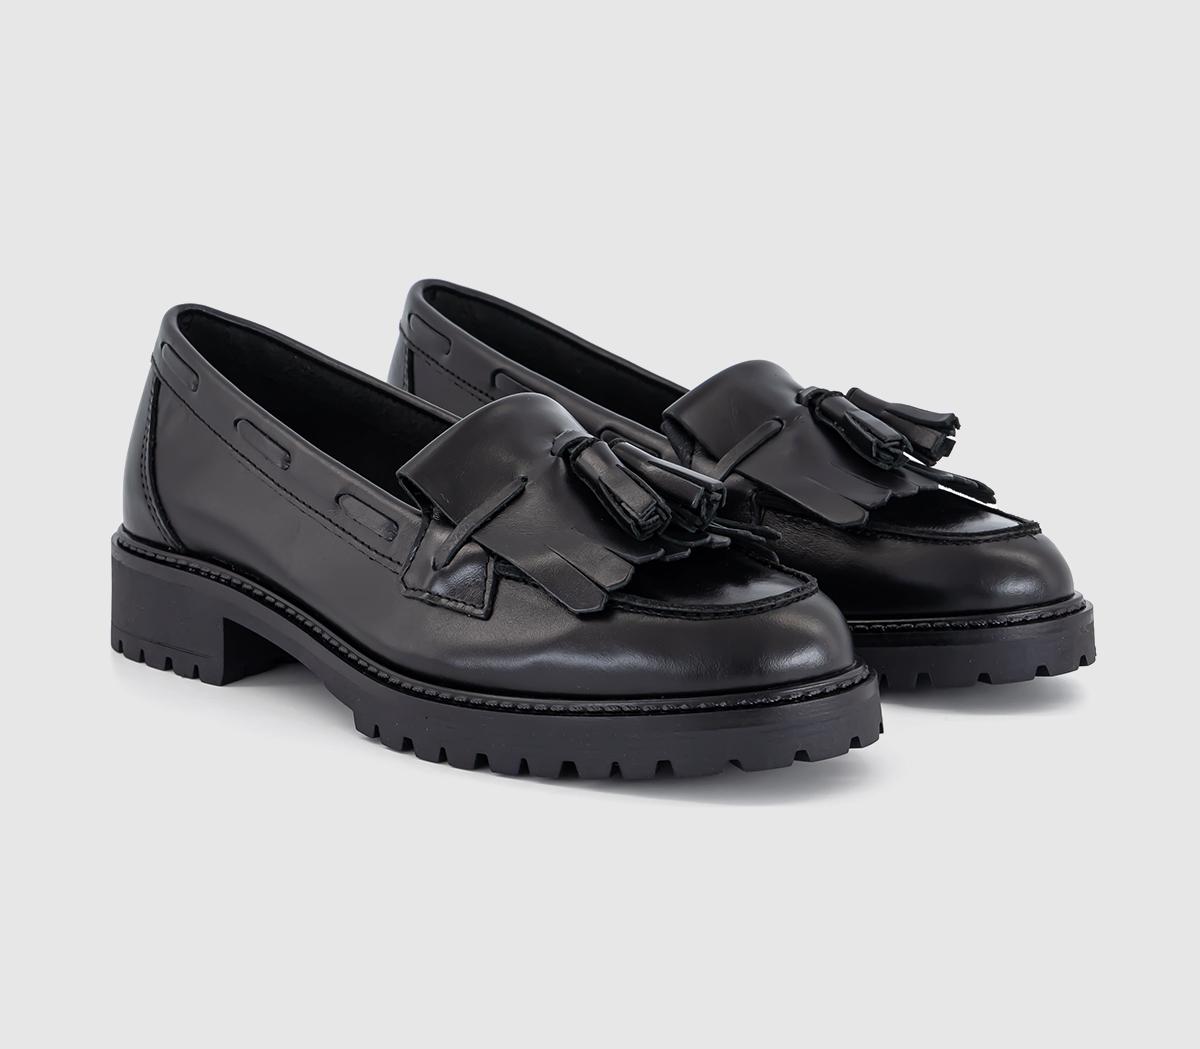 OFFICE Womens Frey Fringe Tassel Cleated Loafers Black Leather, 6